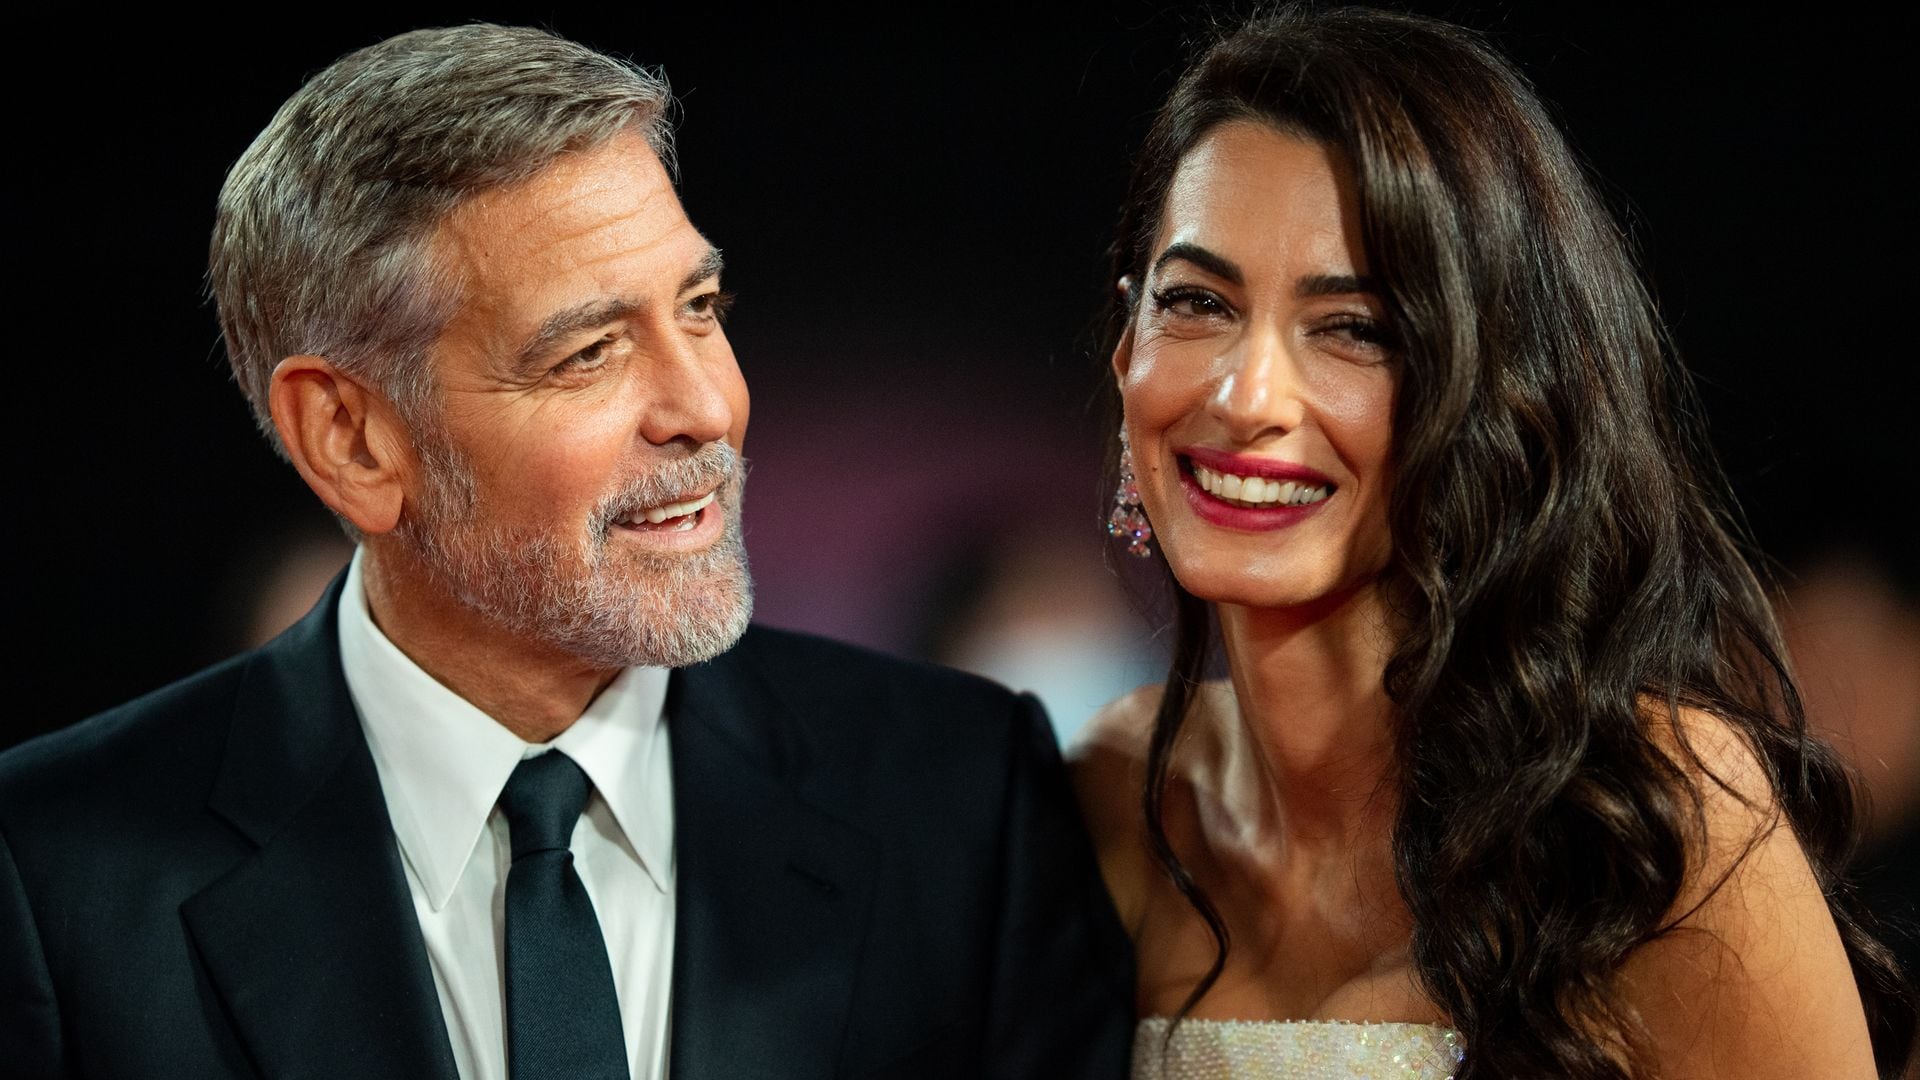 George and Amal Clooney at the BFI London Film Festival